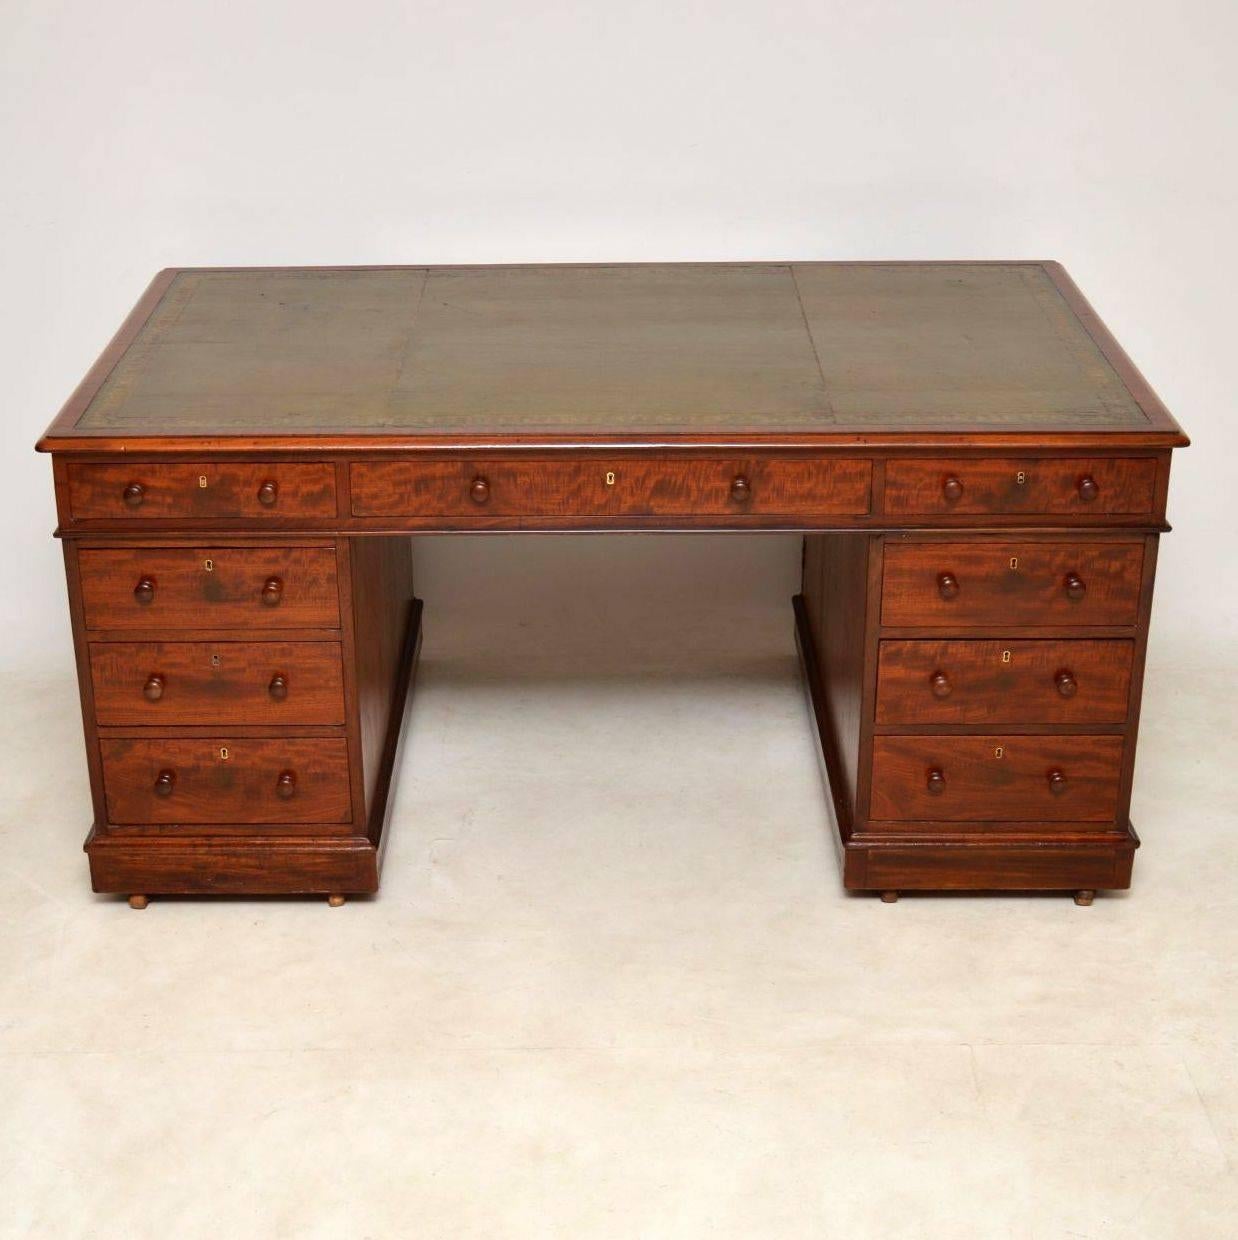 Antique Victorian mahogany partners pedestal desk, dating from the 1840-1860 period and in good condition. These type of desks are getting very hard to find these days and this one is a very nice example. The tooled leather writing surface was on